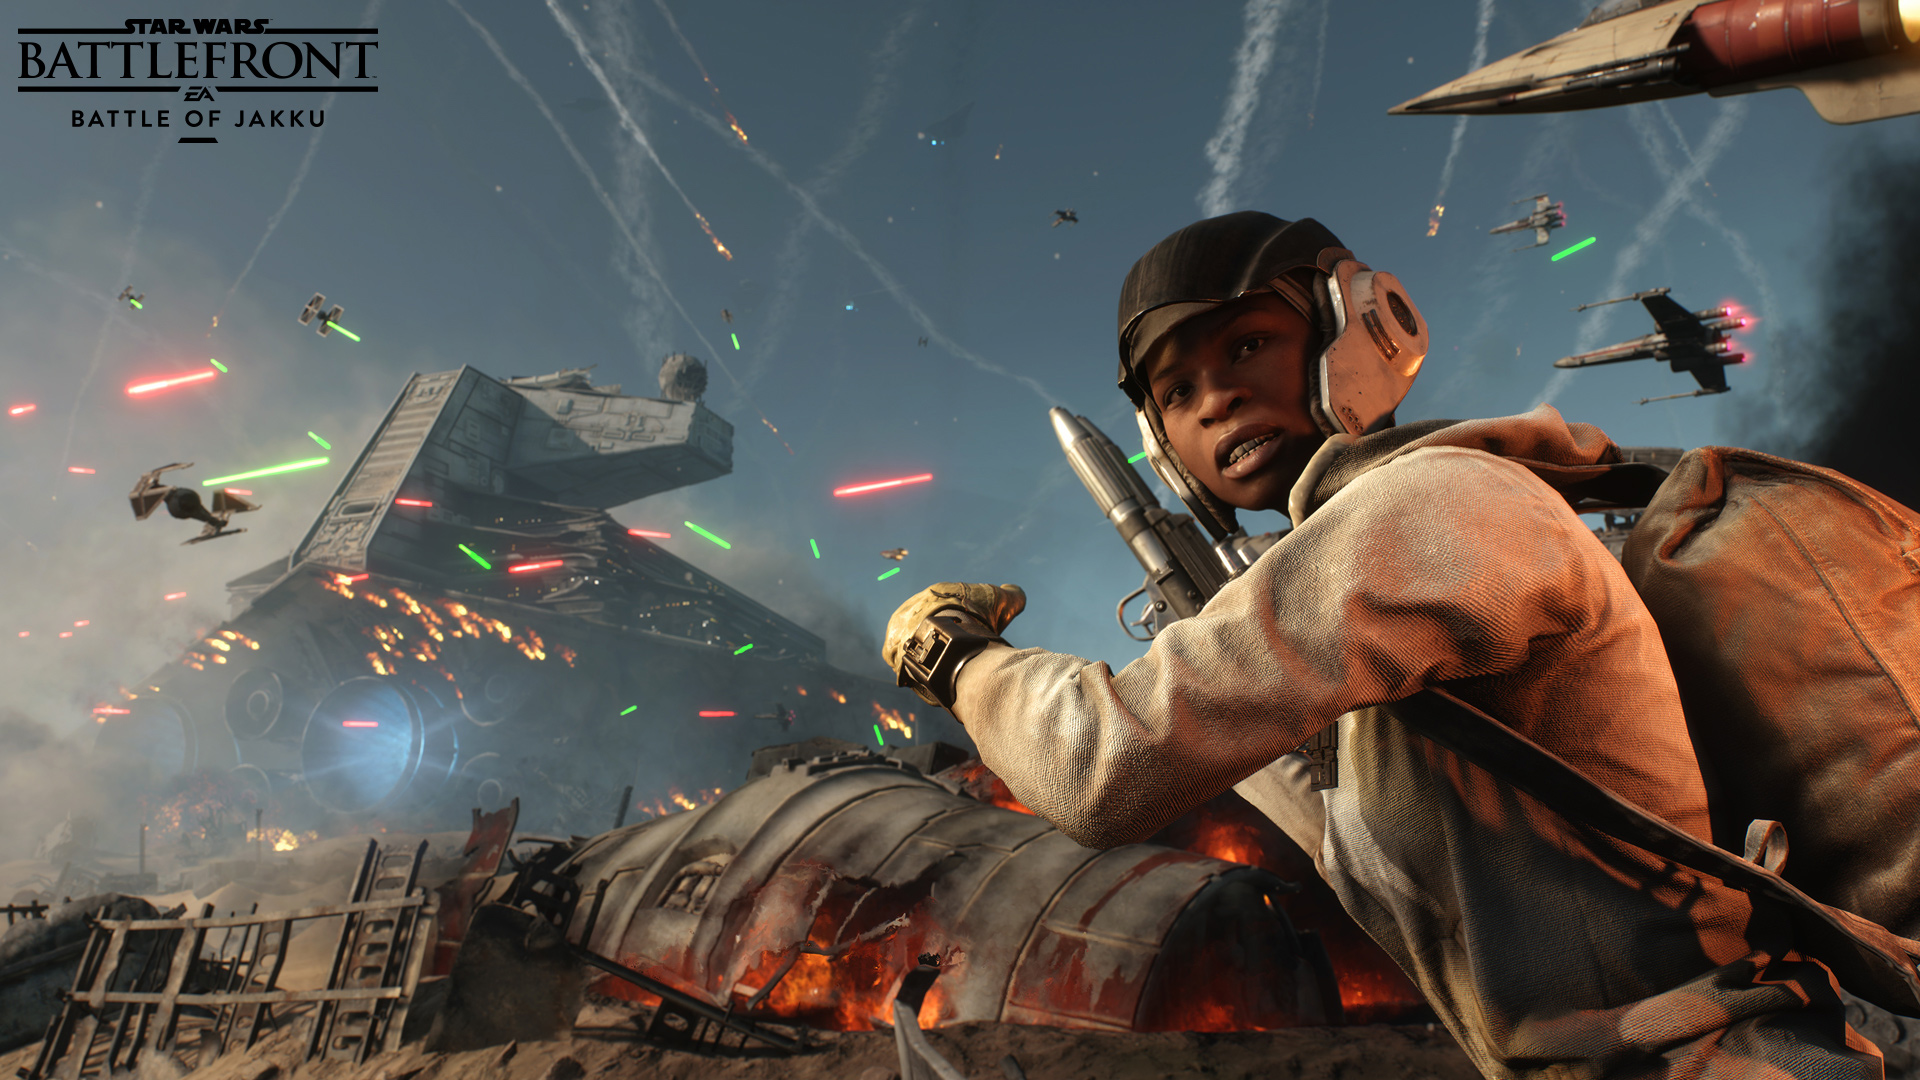 EA Didn’t Put Campaign in “Star Wars Battlefront” to Meet With “Force Awakens” - It Was a 